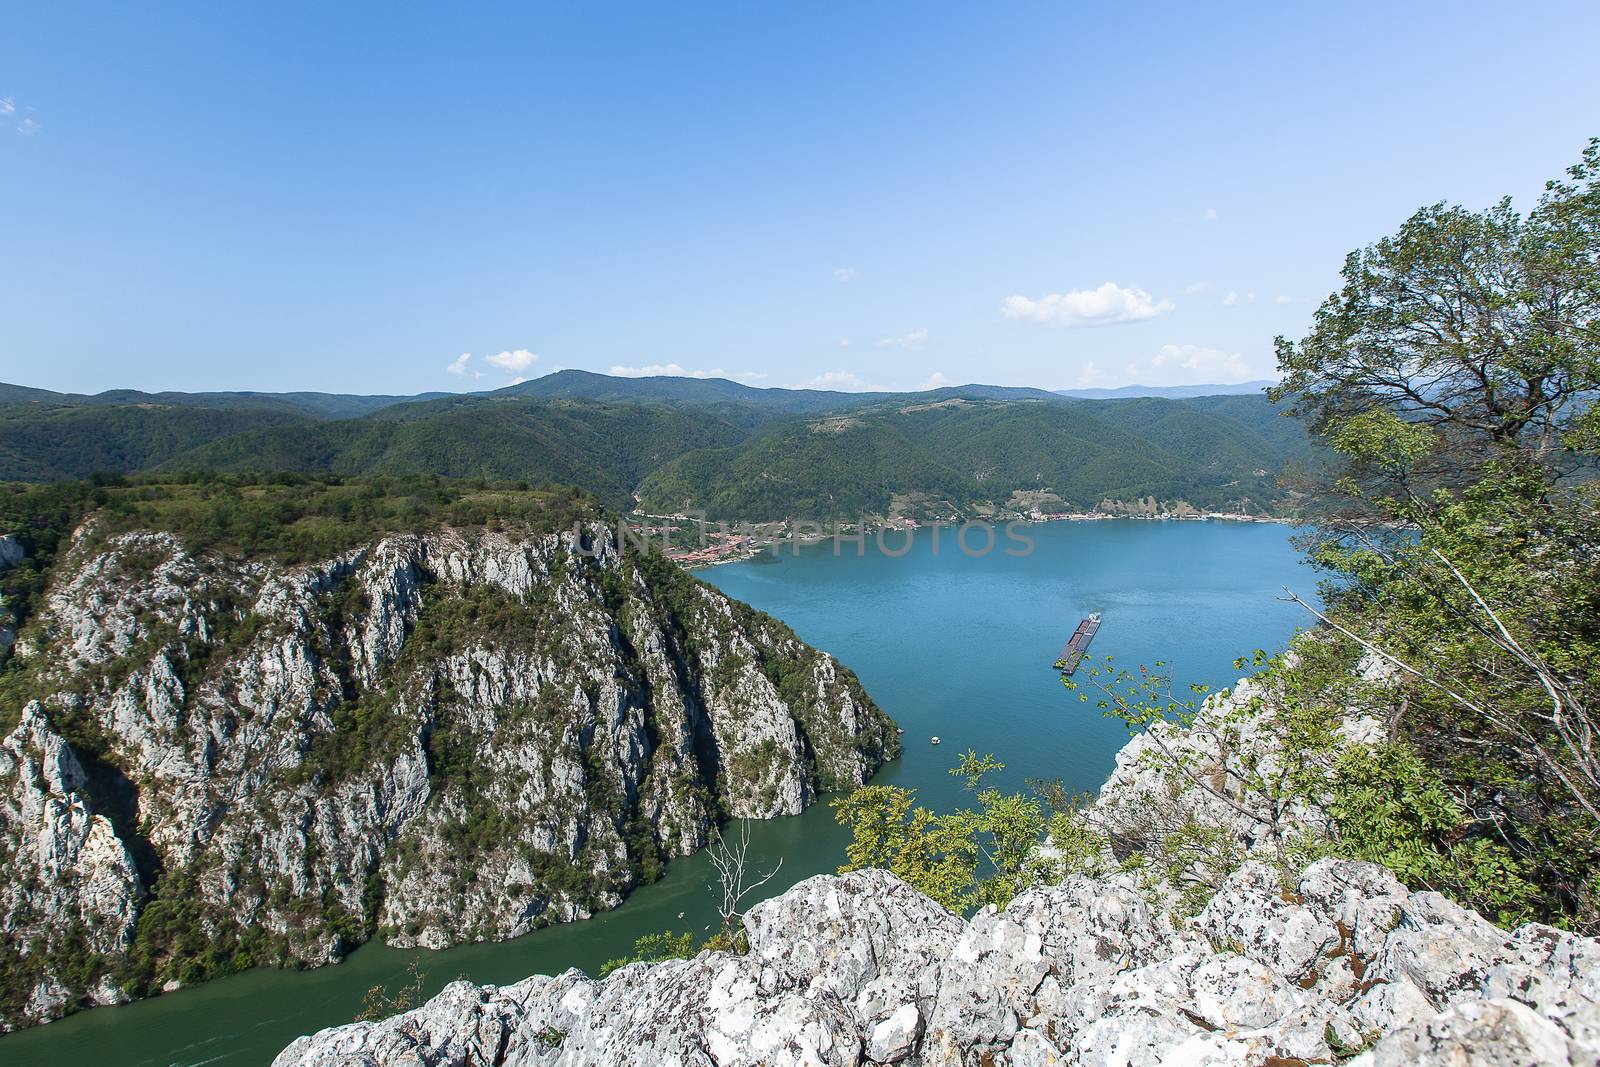 The Danube Gorges by Slast20